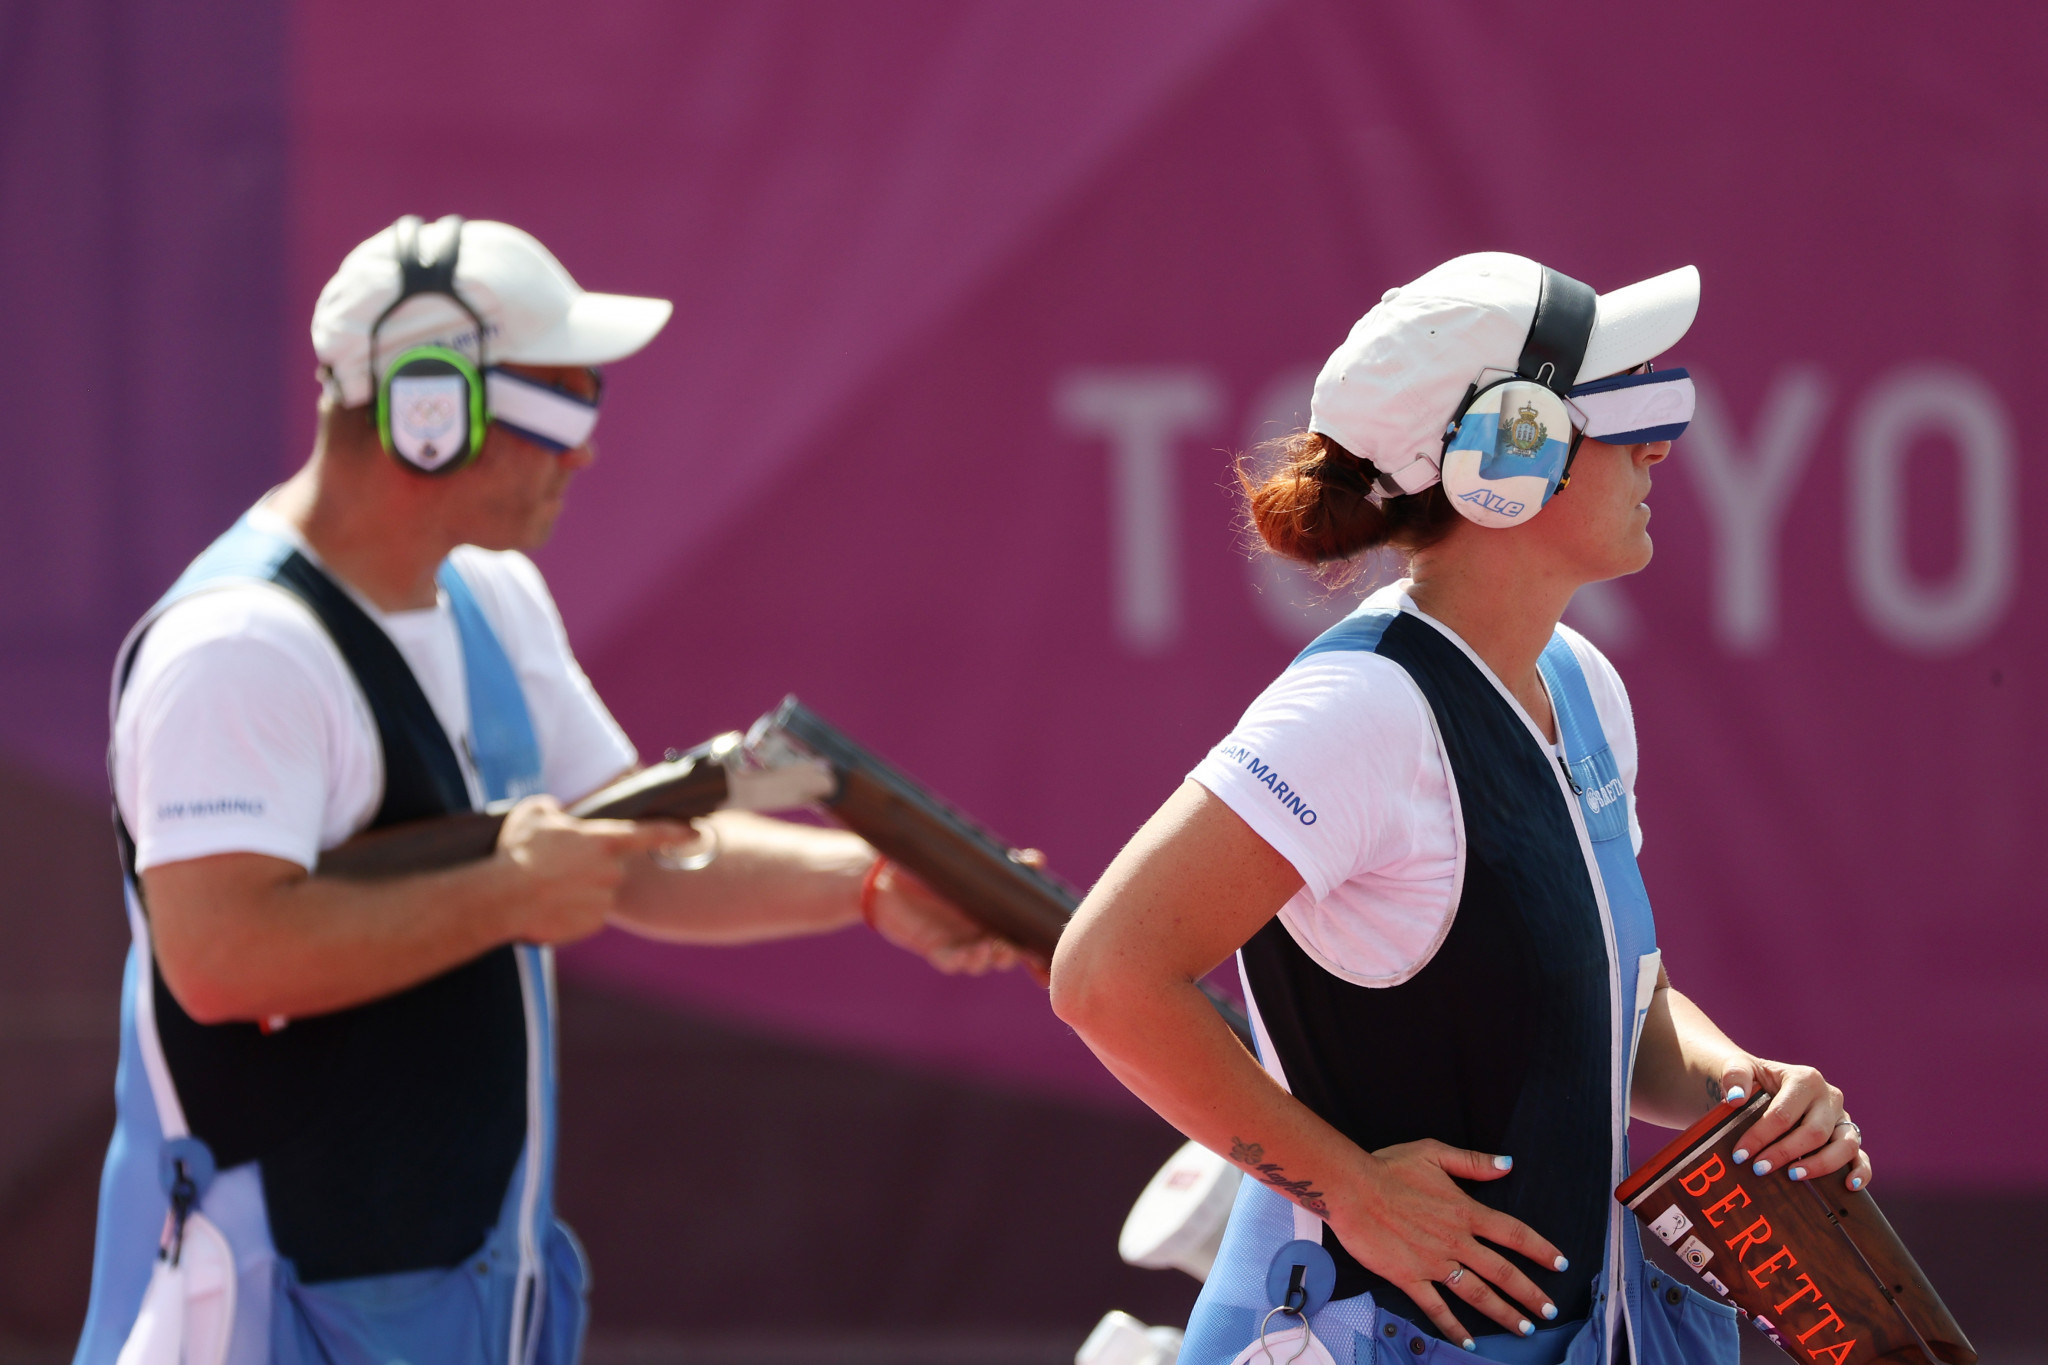 Gian Marco Berti, left, claimed the men's trap title, while Alessandra Perilli, right, lost a women's trap shoot-off ©Getty Images